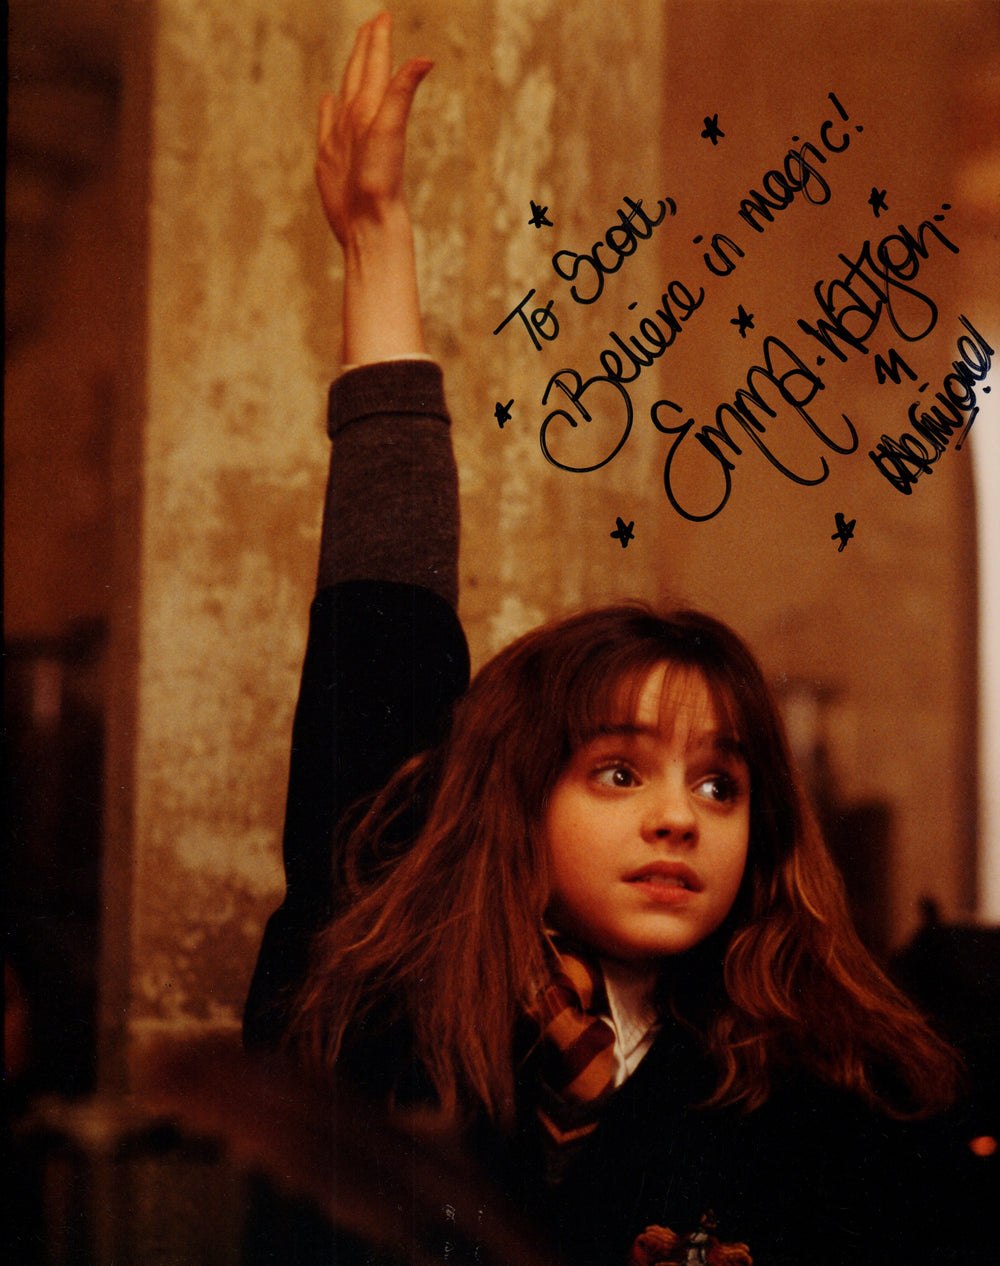 Emma Watson as Hermione Granger from Harry Potter and the Sorcerer's Stone Vintage Signed 8x10 Photo with Quote & Character Name